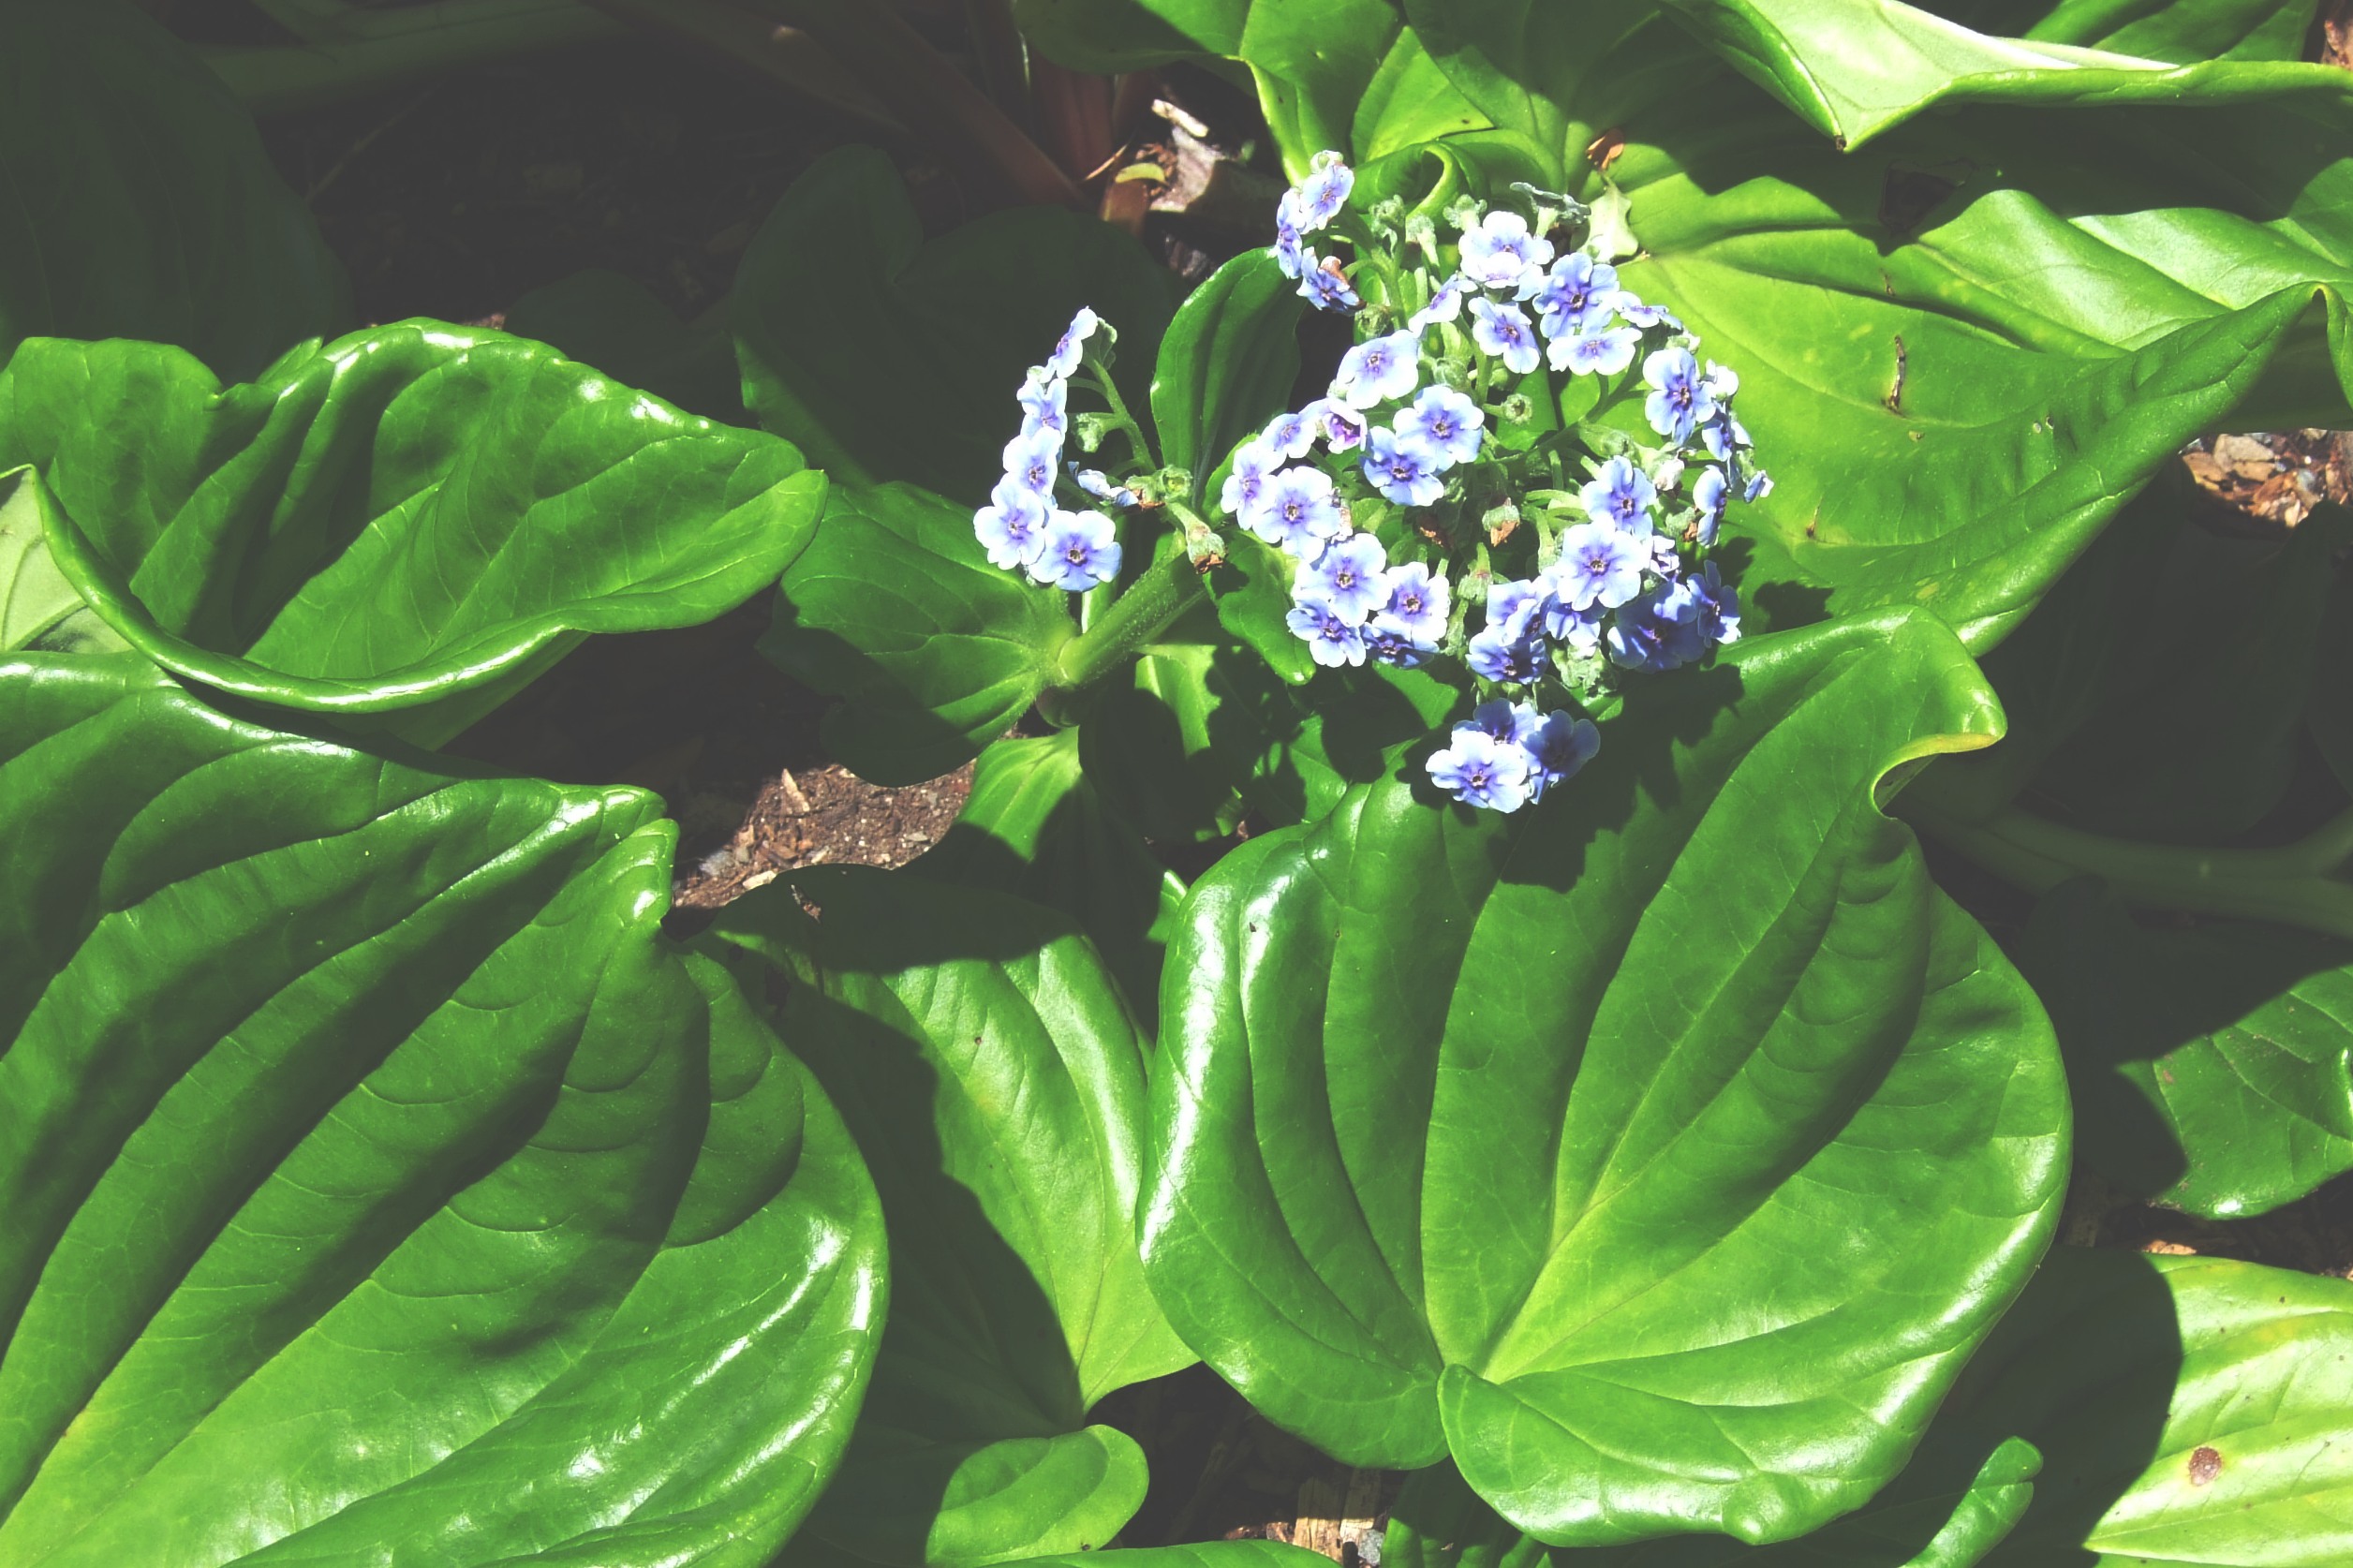 Chatham Islands Forgetmenot. Image credit: Virginia McMillan, Flickr (CC by 2.0)